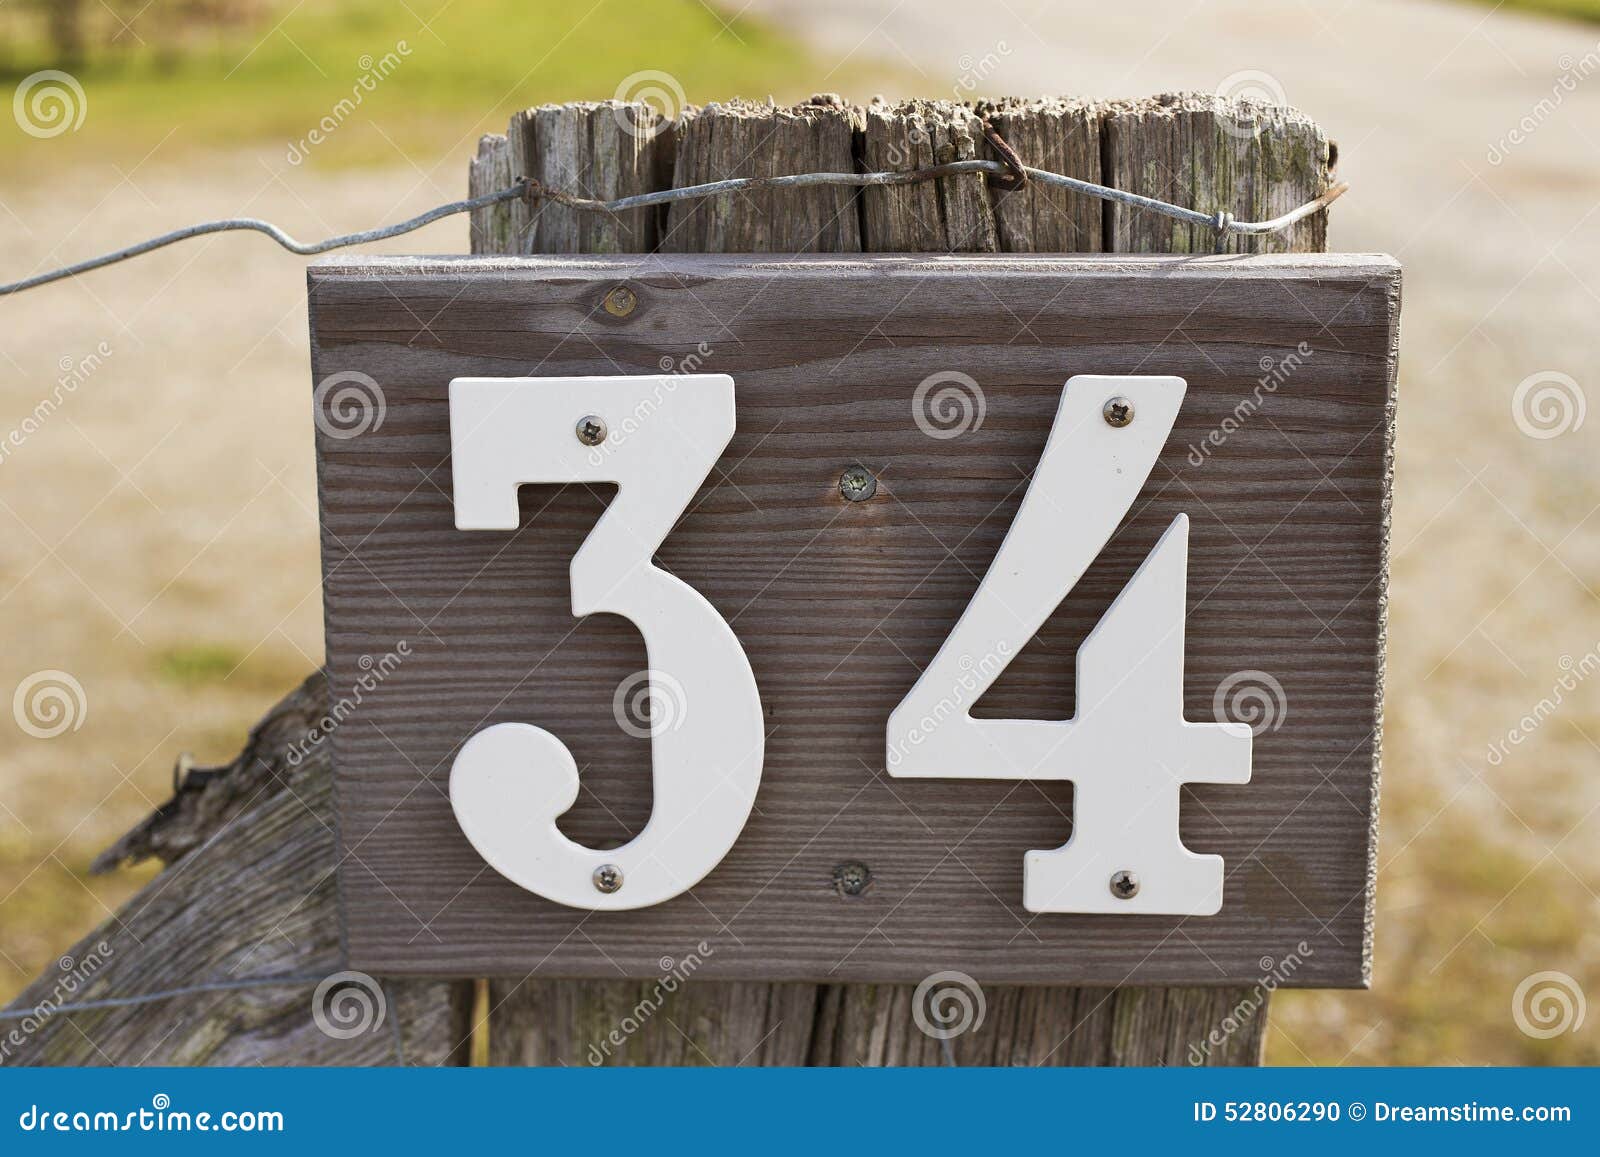 house-number-wooden-sign-white-letters-wooden-fence-background-52806290.jpg